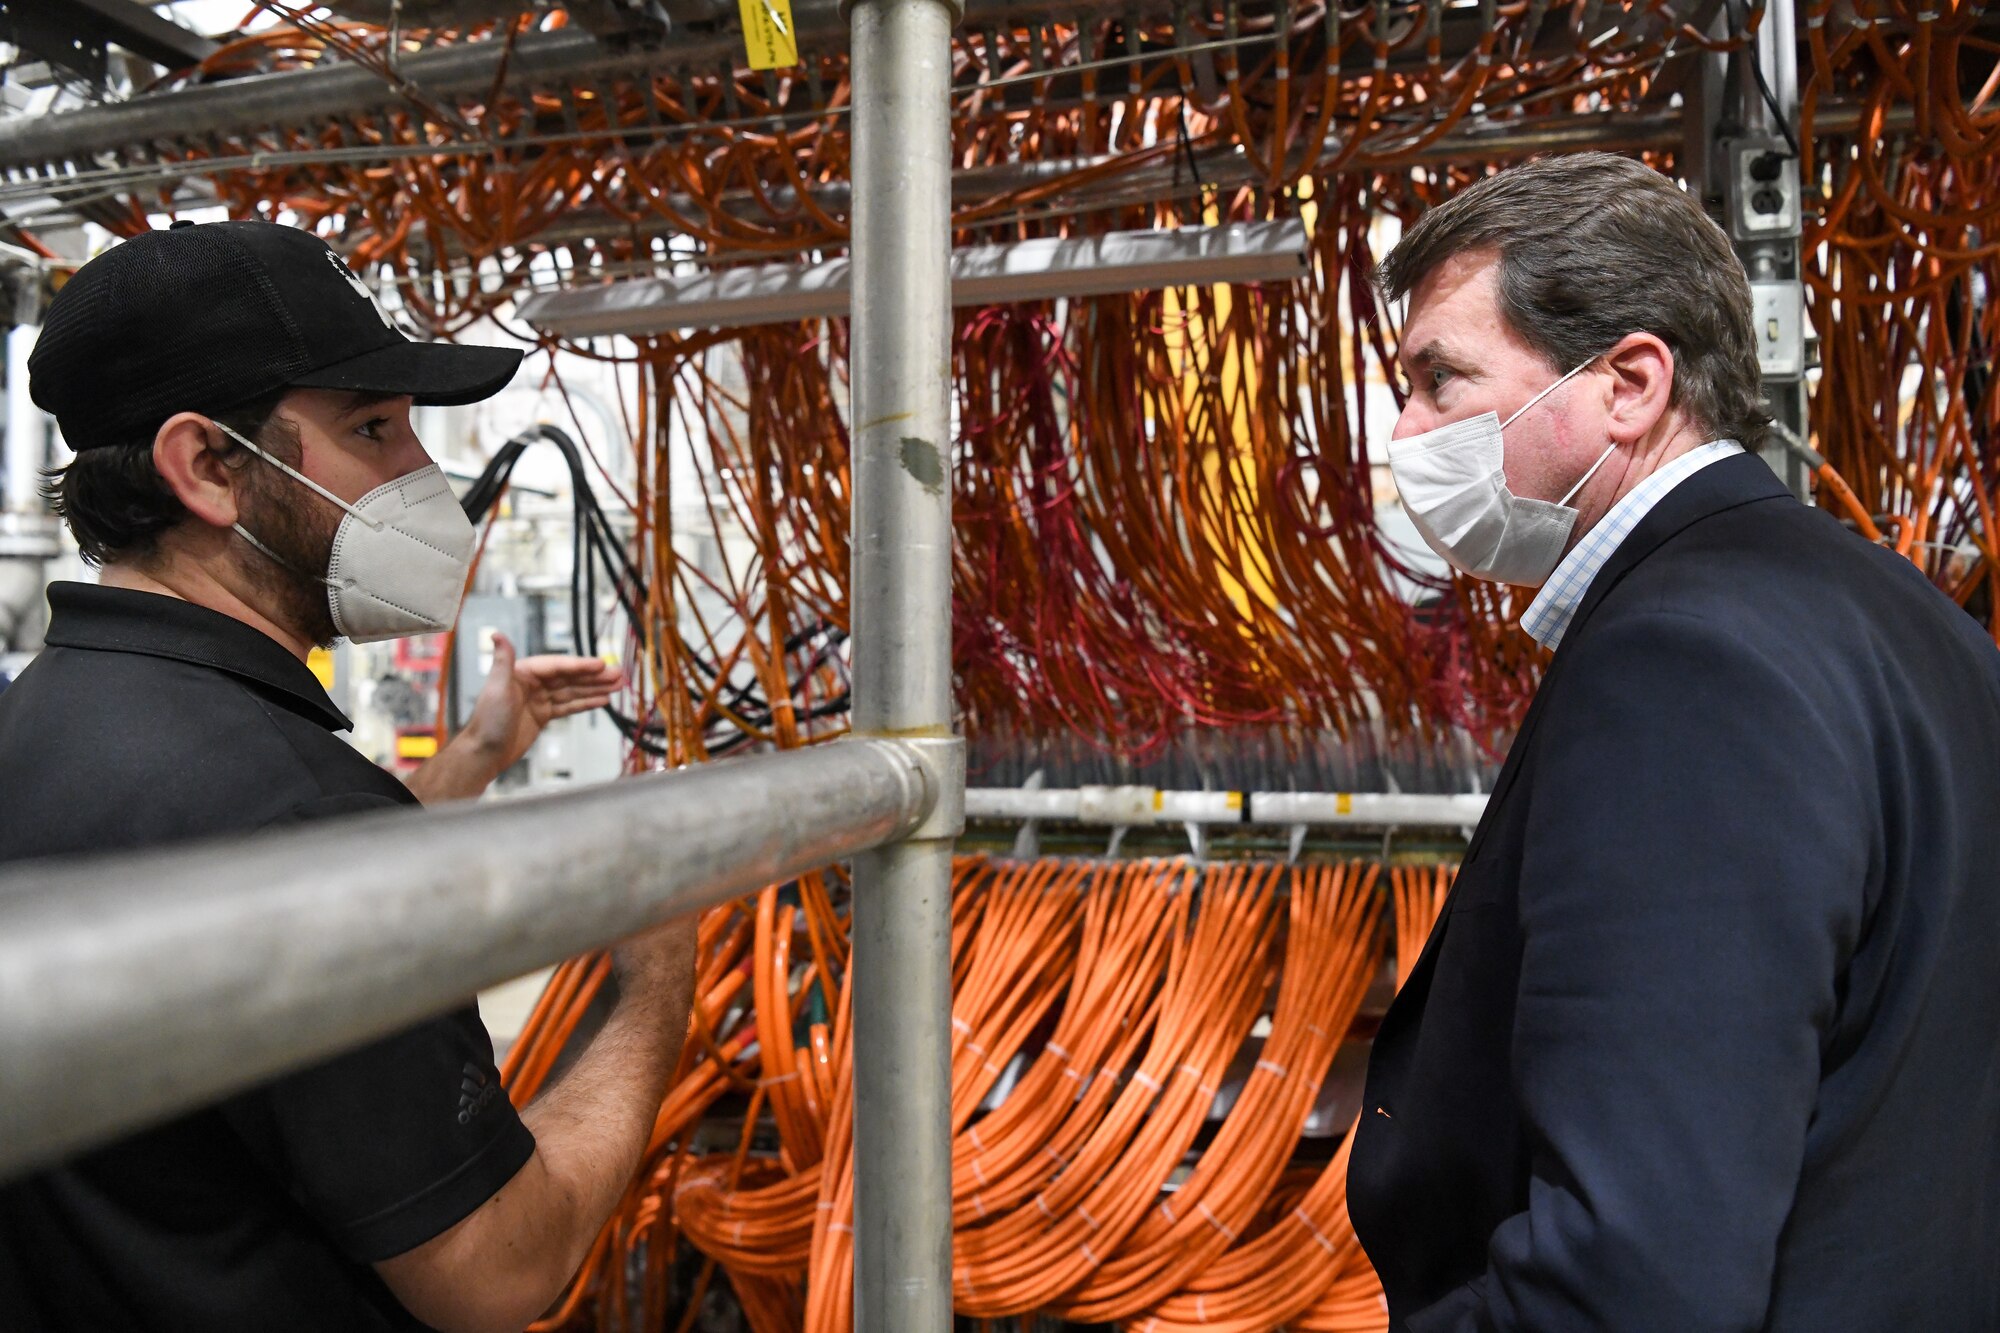 From left, John Hile, an Arnold Engineering Development Complex (AEDC) test engineer, explains how an arc heater works to Sen. Bill Hagerty of Tennessee during a visit by the senator to the headquarters of AEDC, Arnold Air Force Base, Tenn., Aug. 23, 2021. Arc heaters allow for the testing of thermal protection systems in simulated environments representative of hypersonic flight. (U.S. Air Force photo by Jill Pickett)